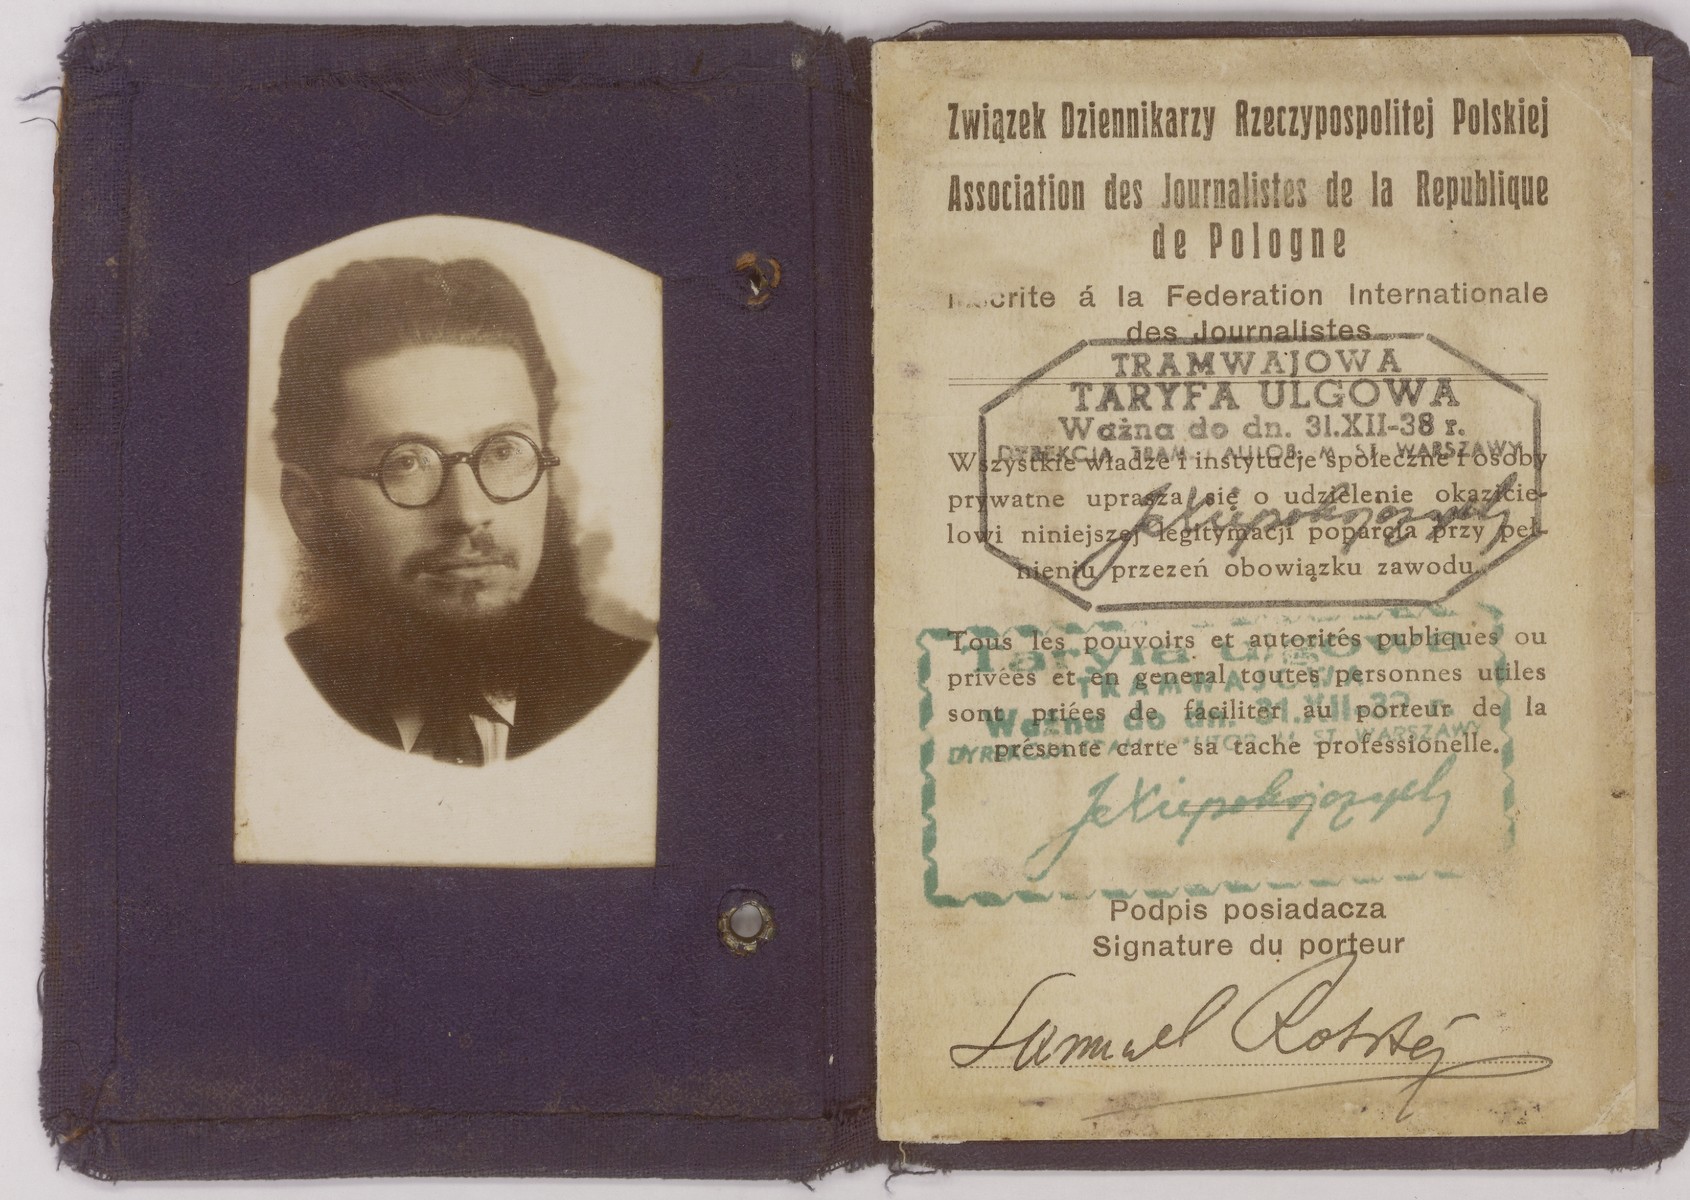 Membership card issued to Szmuel Icek Rotsztajn, the donor's father, by the Association of Journalists in Poland.  

Rotsztajn was an orthodox Jewish publicist, novelist and short story writer, who was co-editor of "Dos Yiddishe Tagblat" and editor of the orthodox literary journal "Der Flaker".